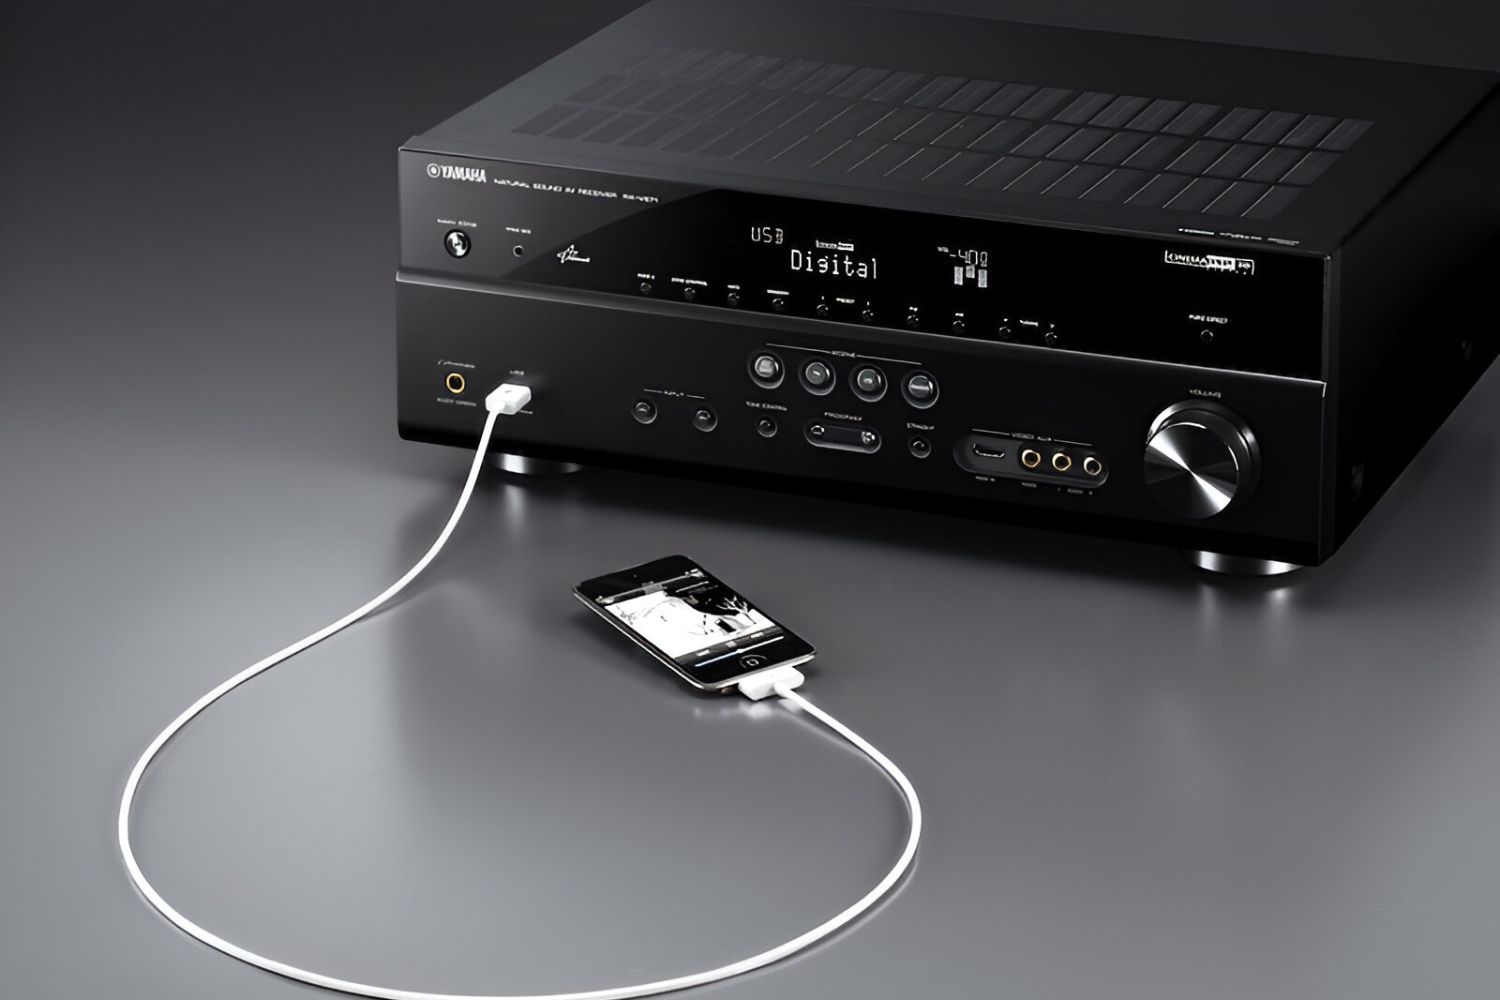 How Do I Connect My Phone To An AV Receiver